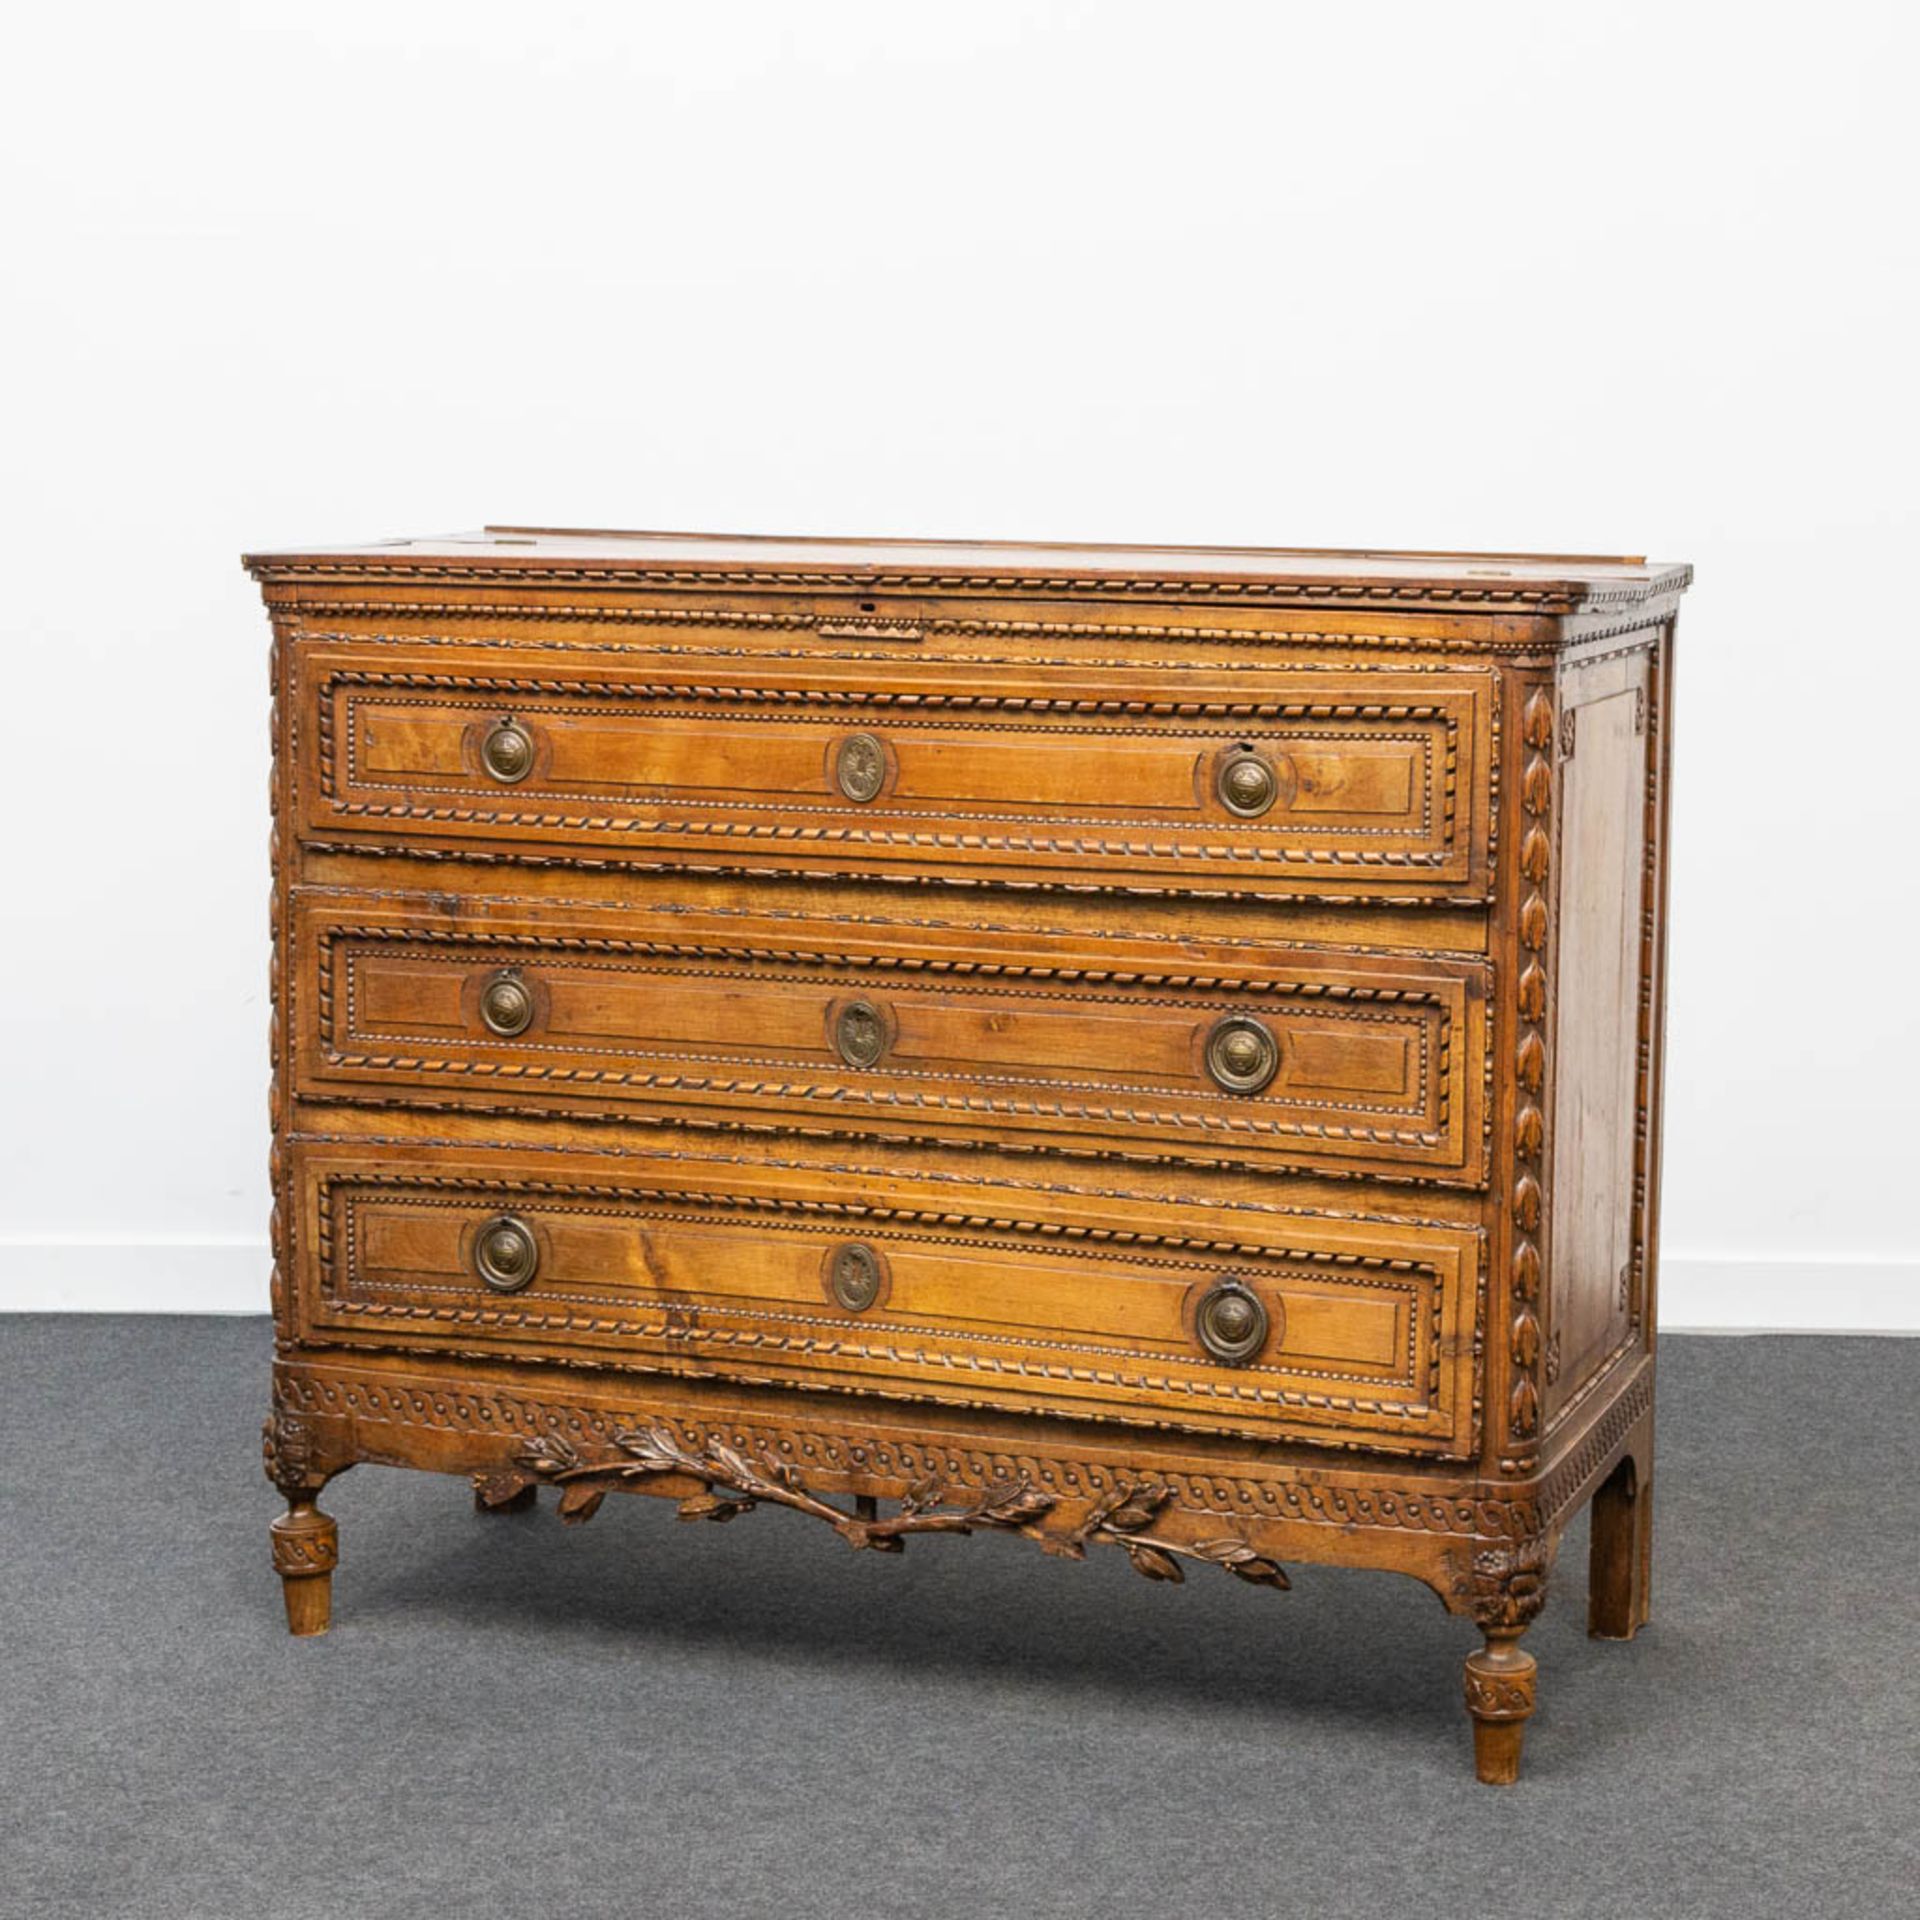 A wood sculptured commode in Louis XVI style, with 3 drawers and a hidden desk. 18th century. - Image 8 of 23